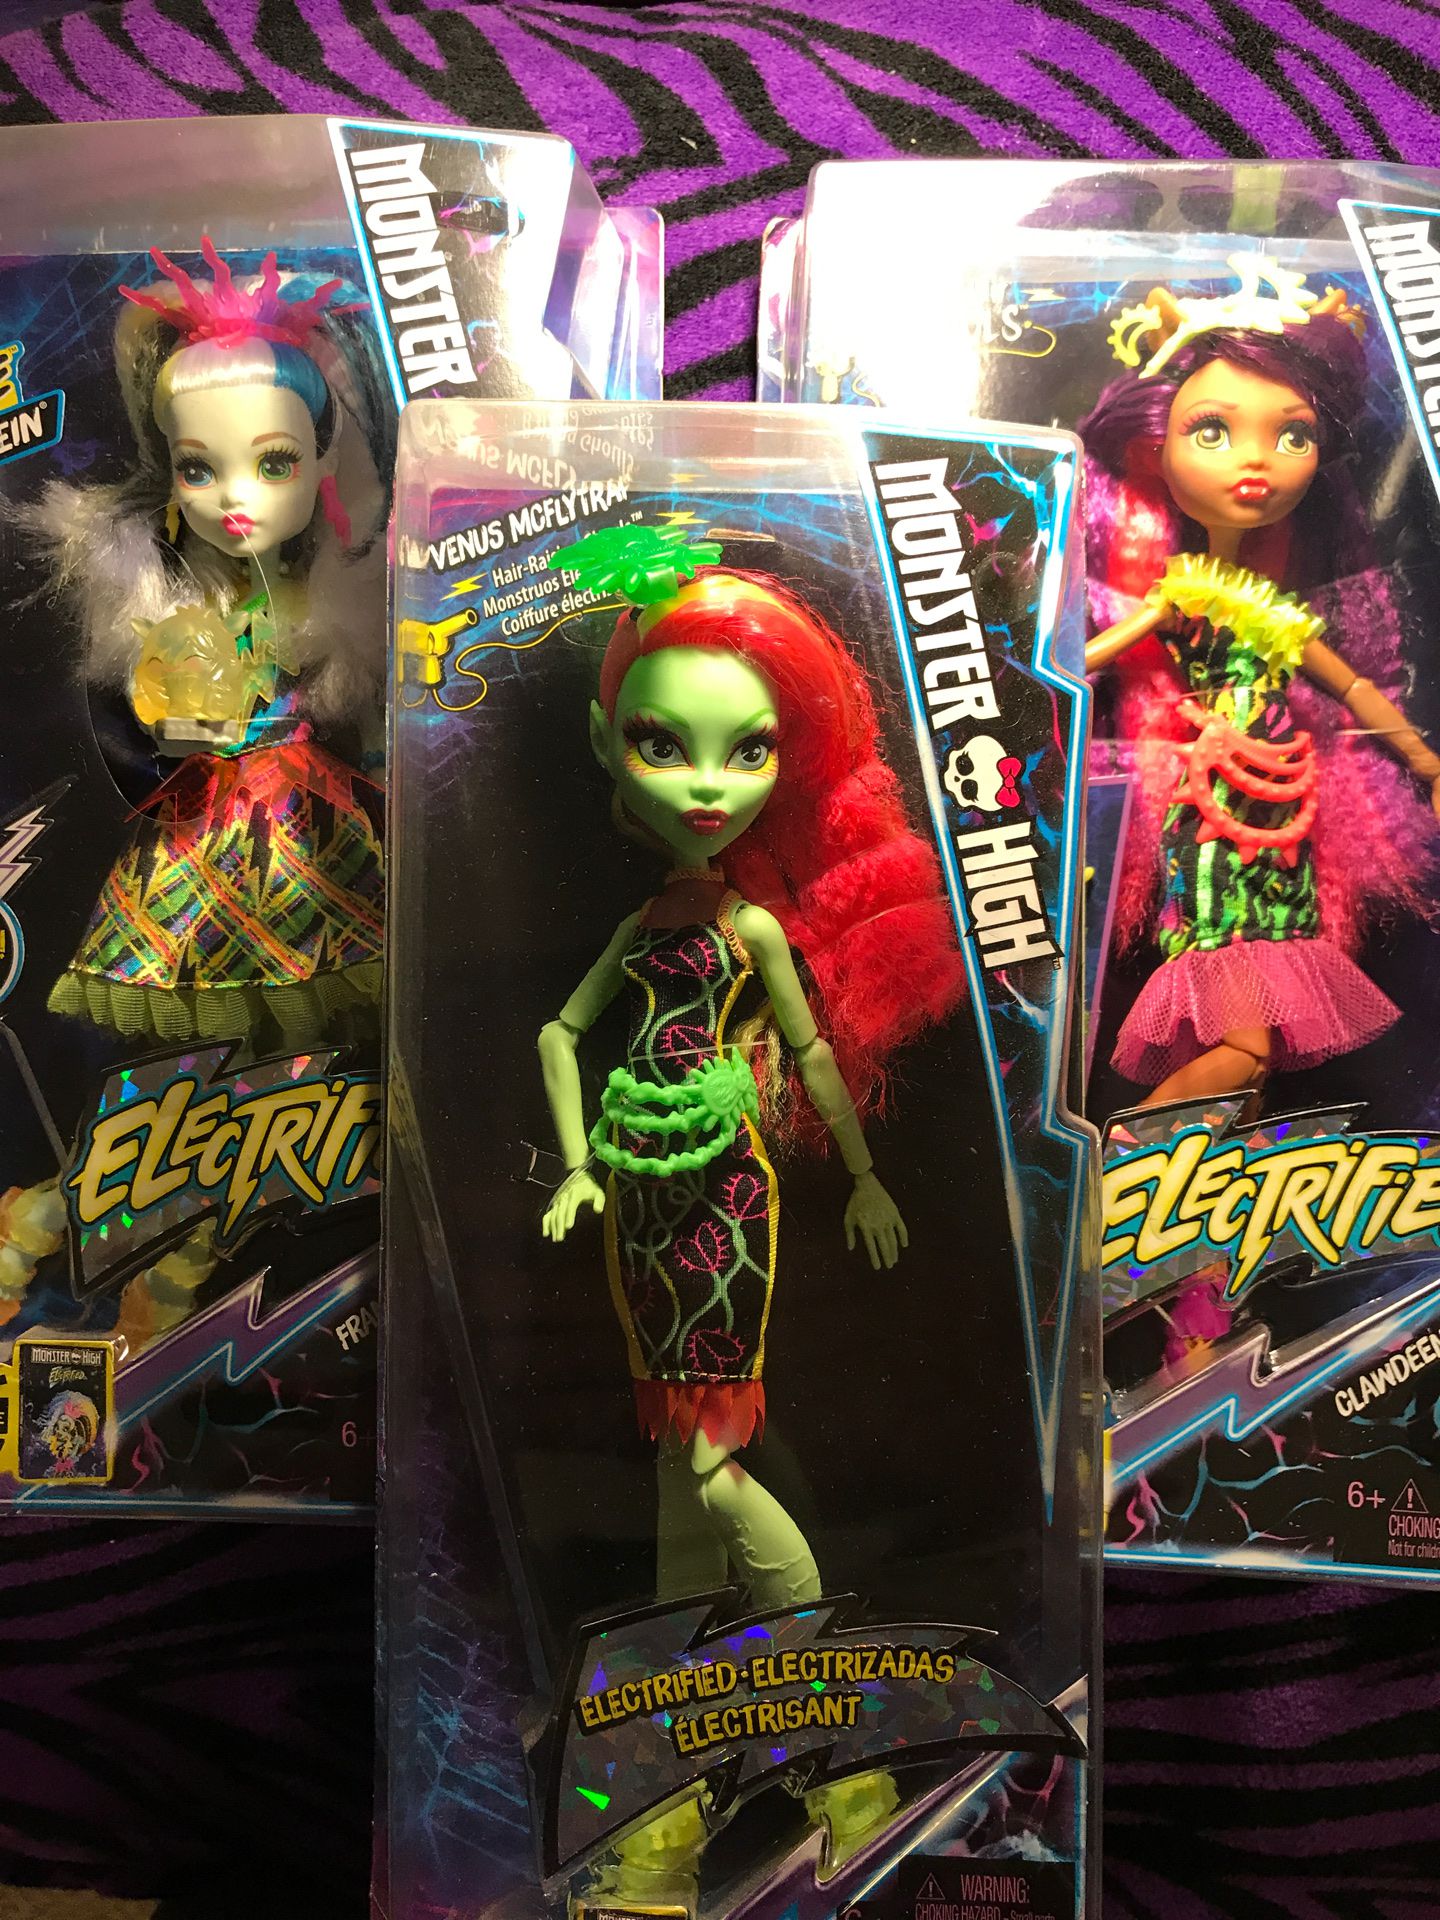 Monster High Dolls Electrified Venus, Clawdeen, and Frankie